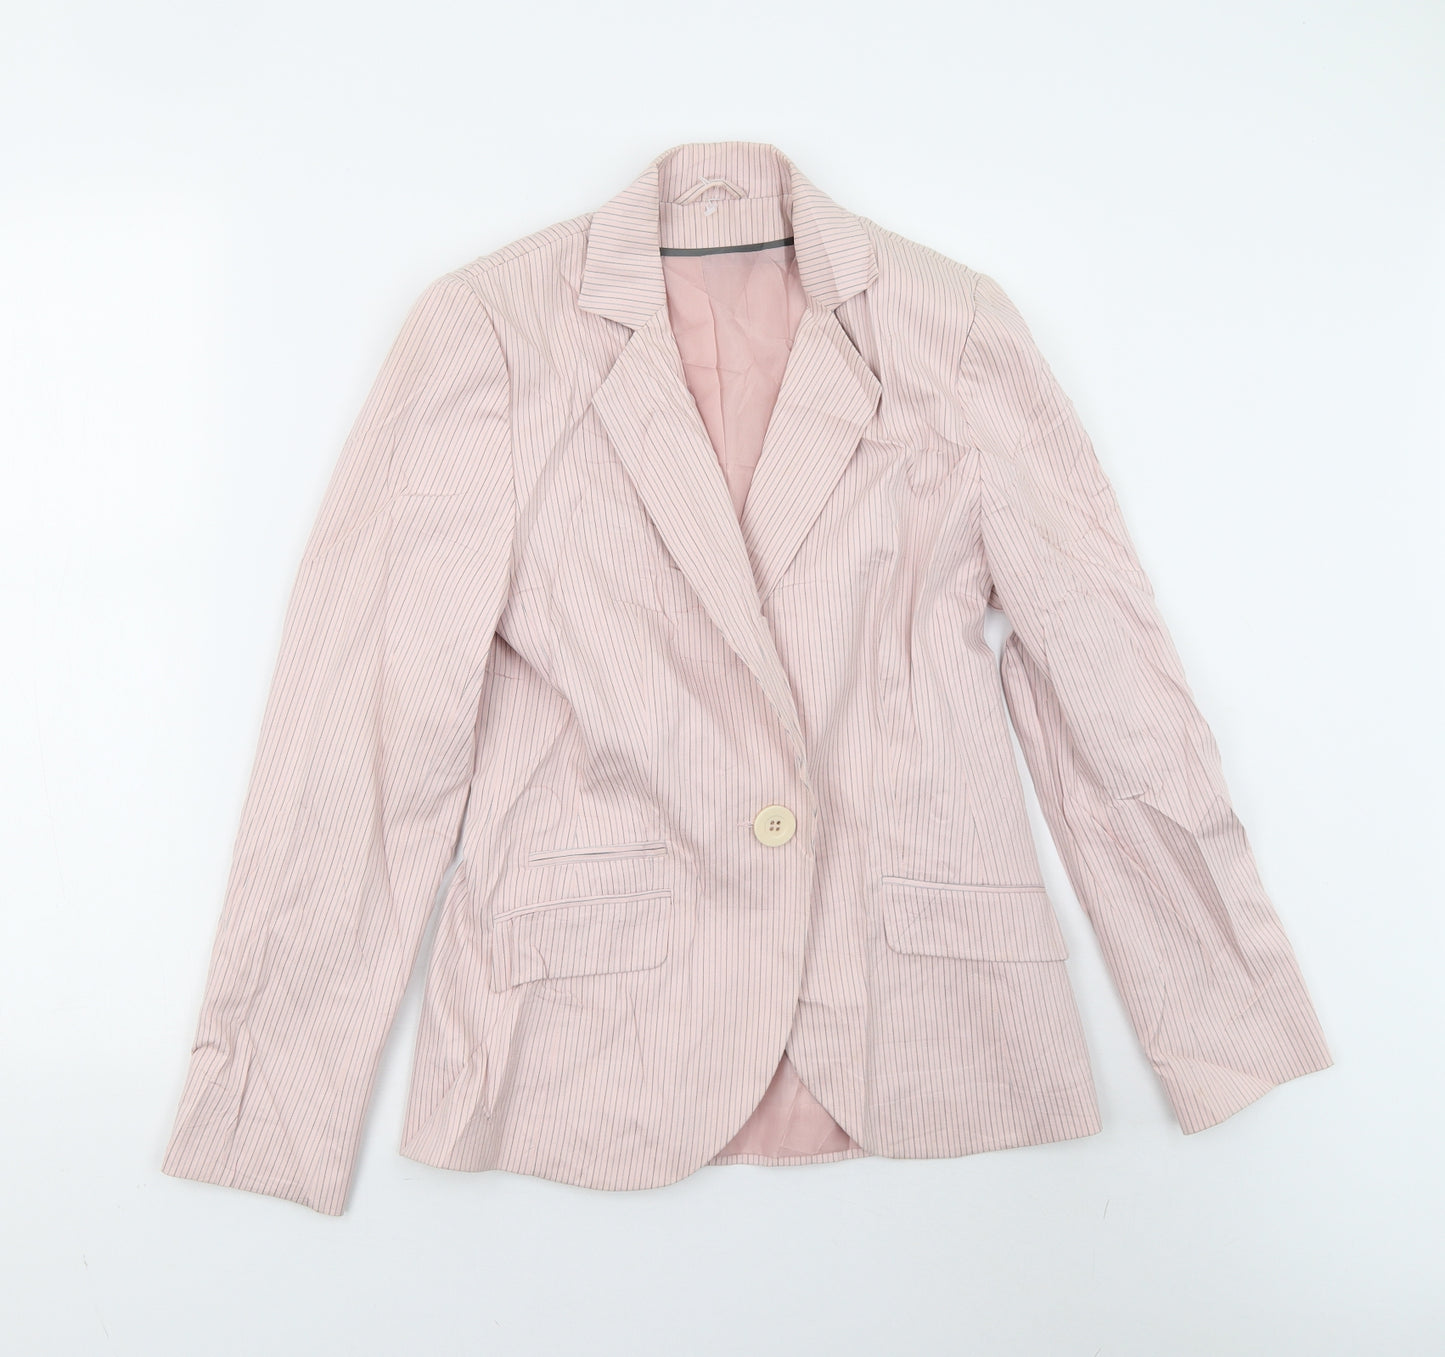 Bay Trading Womens Pink Striped  Jacket Suit Jacket Size S